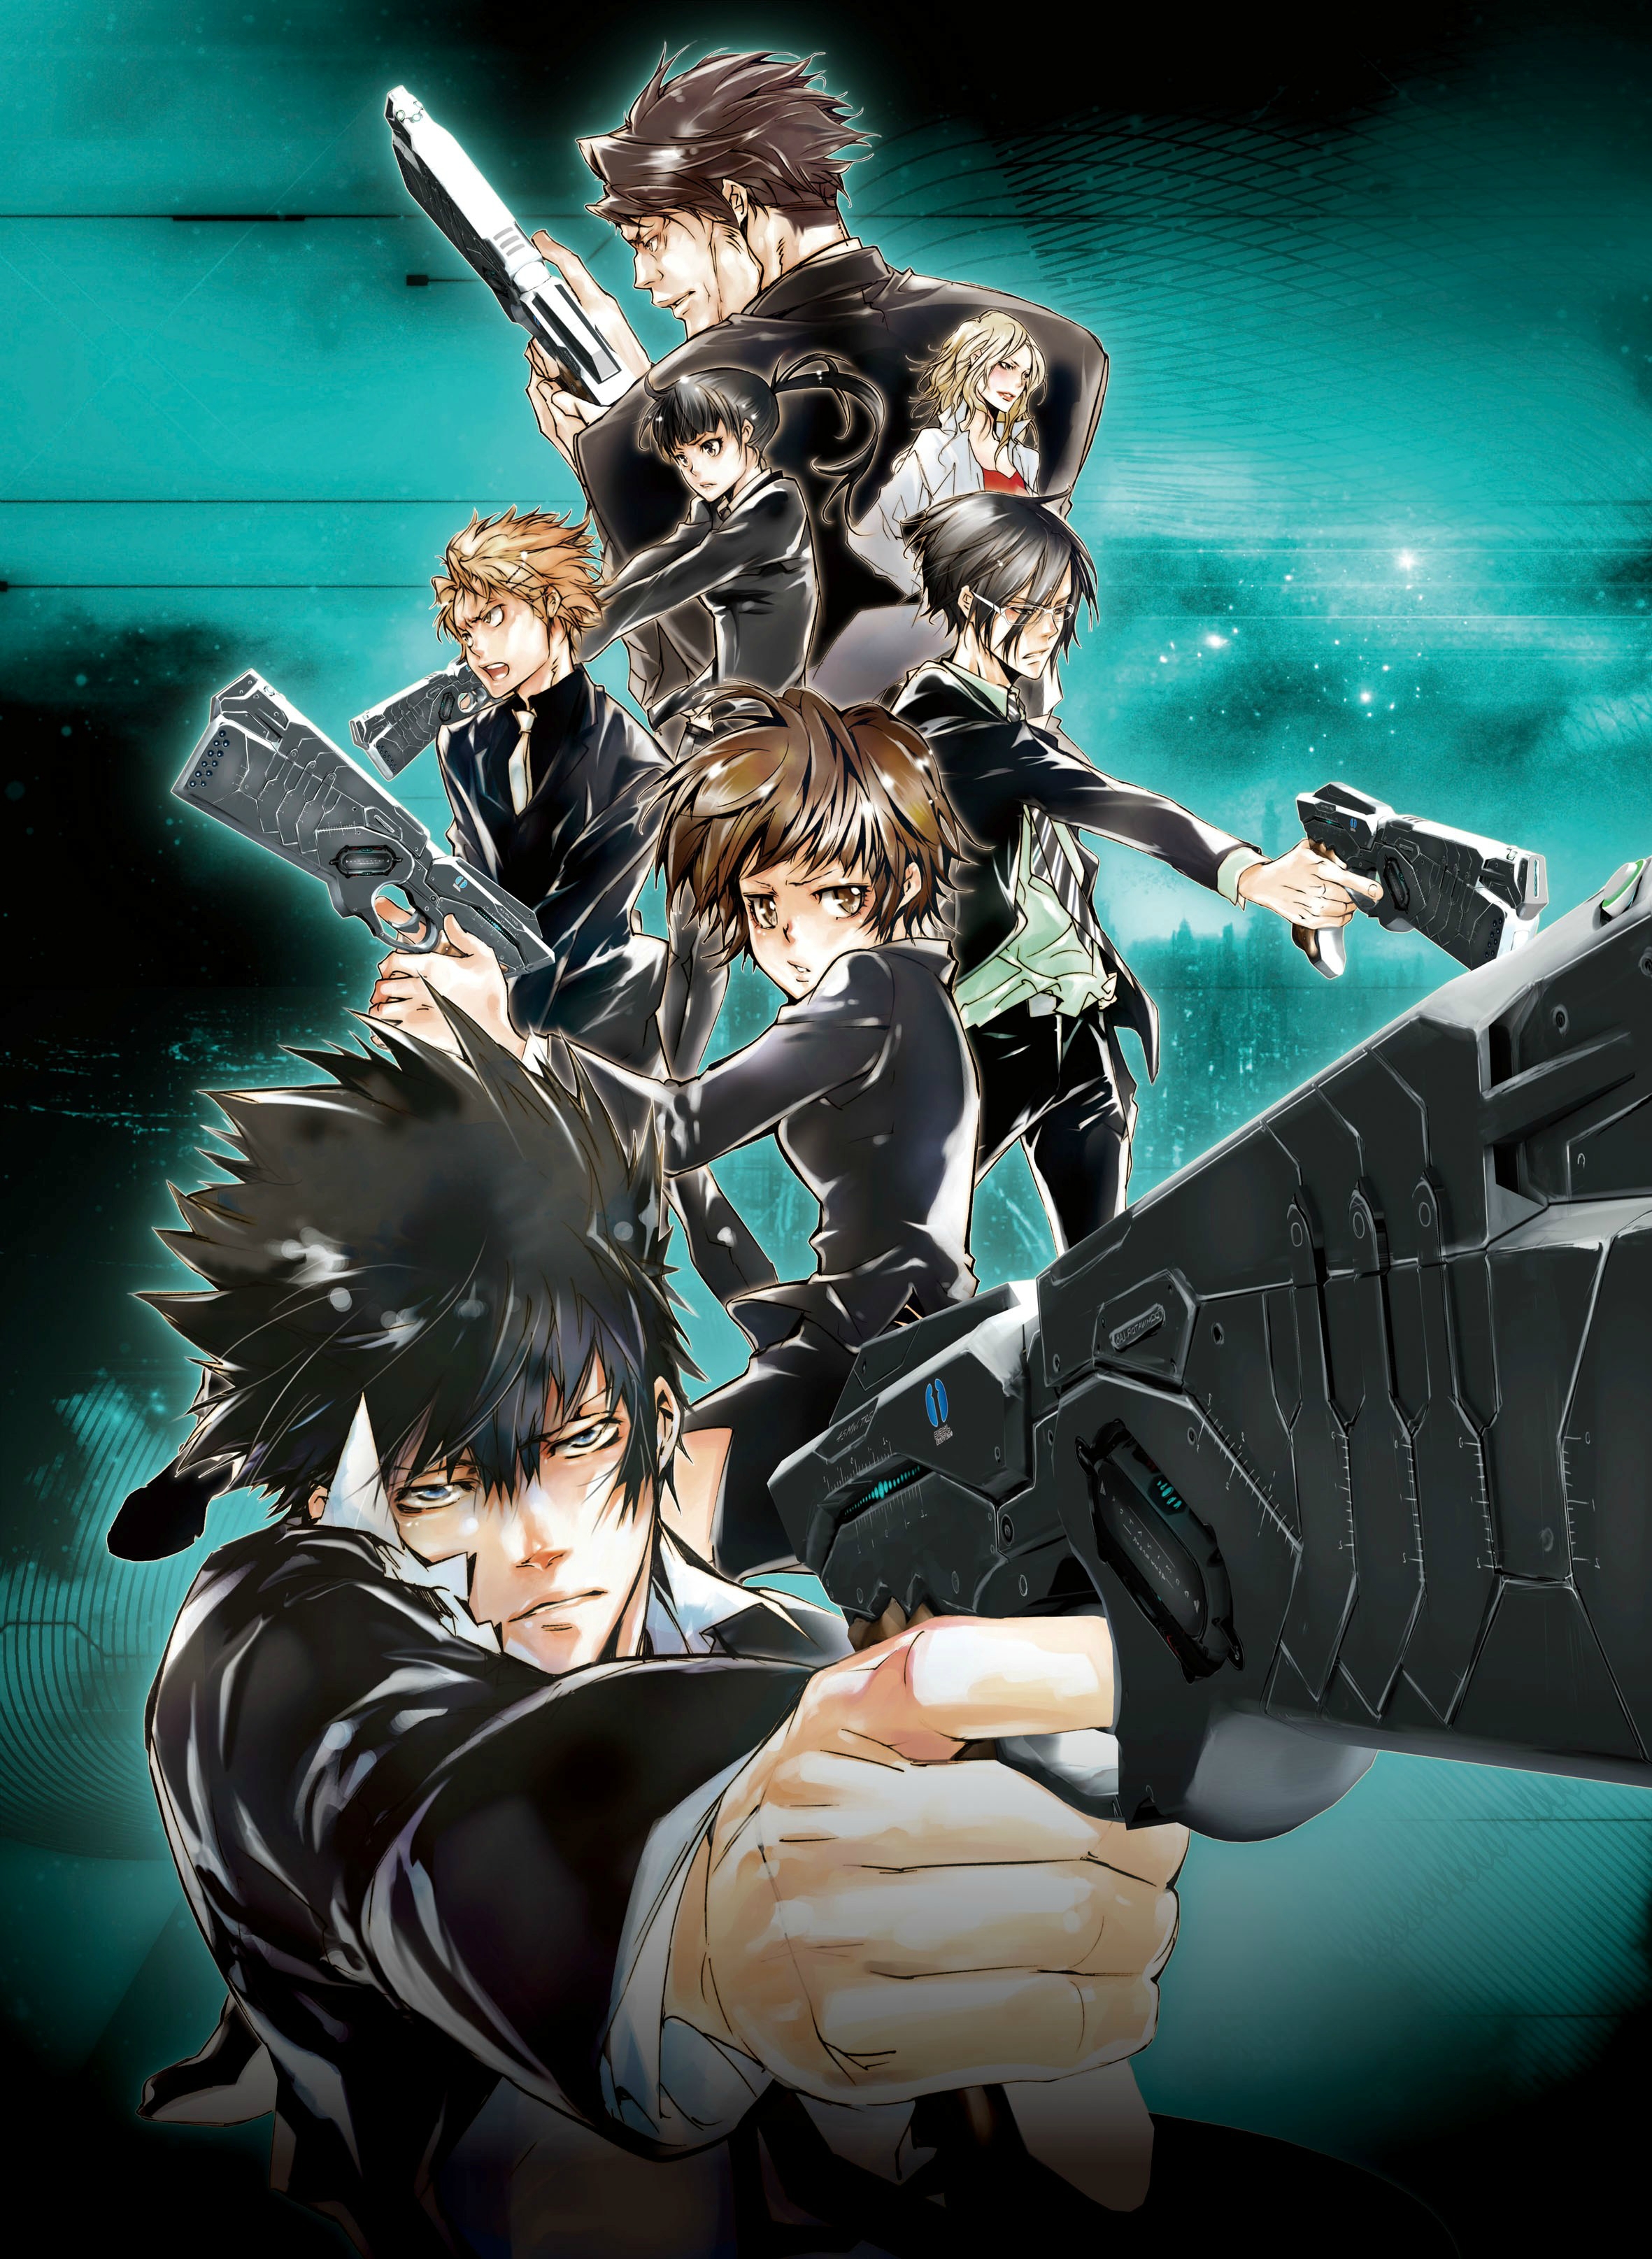 Top 10 Anime Series from NewType’s May 2015 Issue psycho-pass